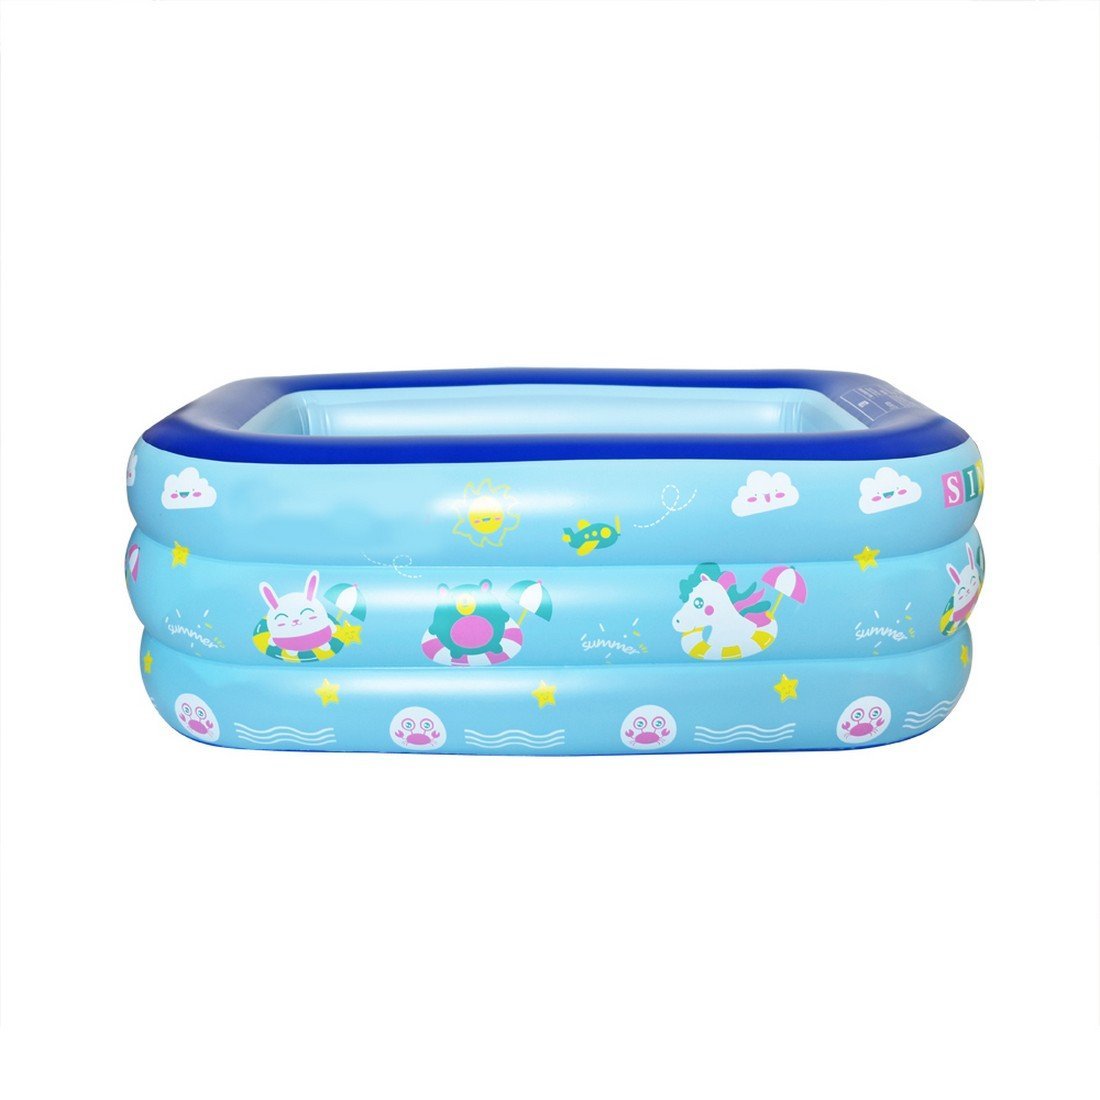  for children pool approximately 130*90*50cm home use vinyl pool heat countermeasure thickness . interior outdoors thickness . leak prevention playing in water . large activity parent . pink 